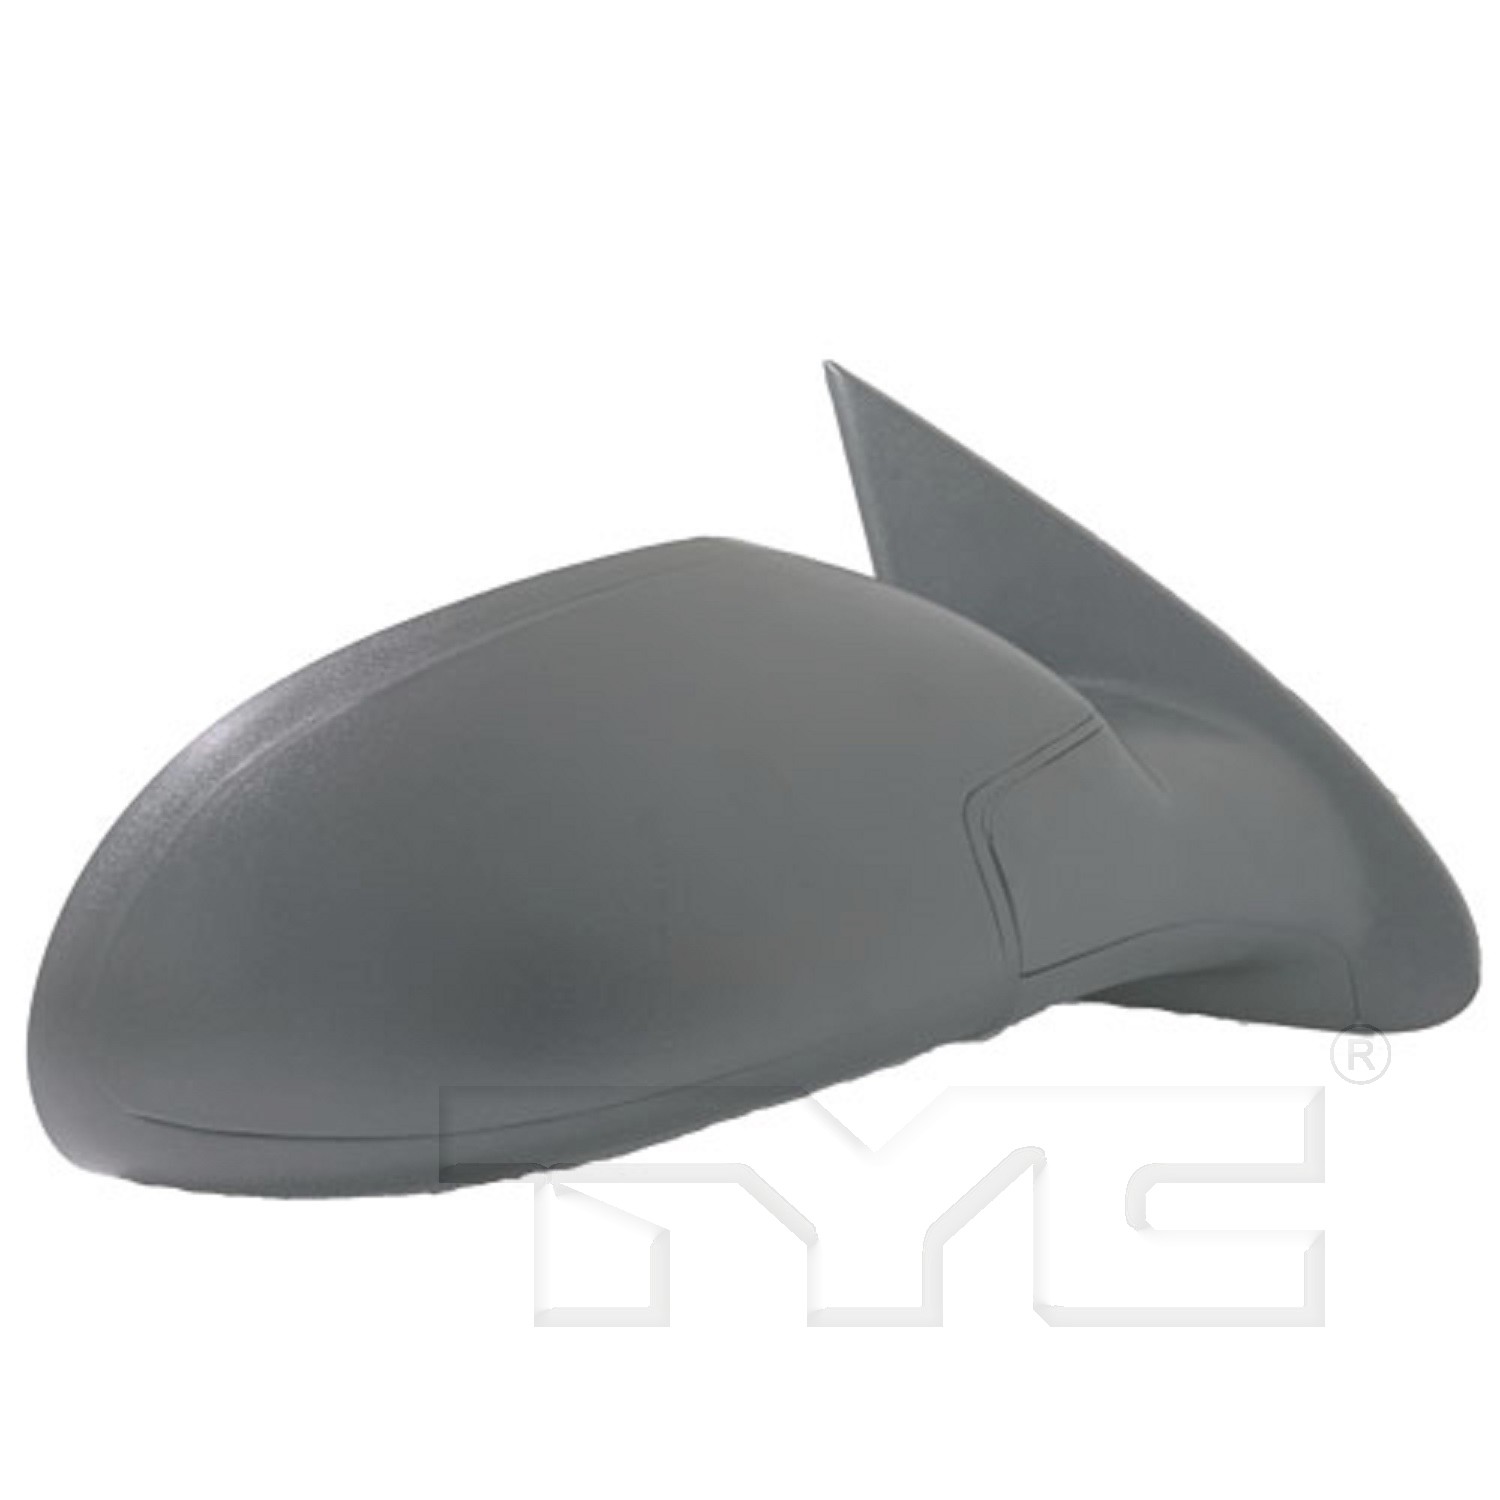 Aftermarket MIRRORS for CHEVROLET - COBALT, COBALT,05-10,RT Mirror outside rear view